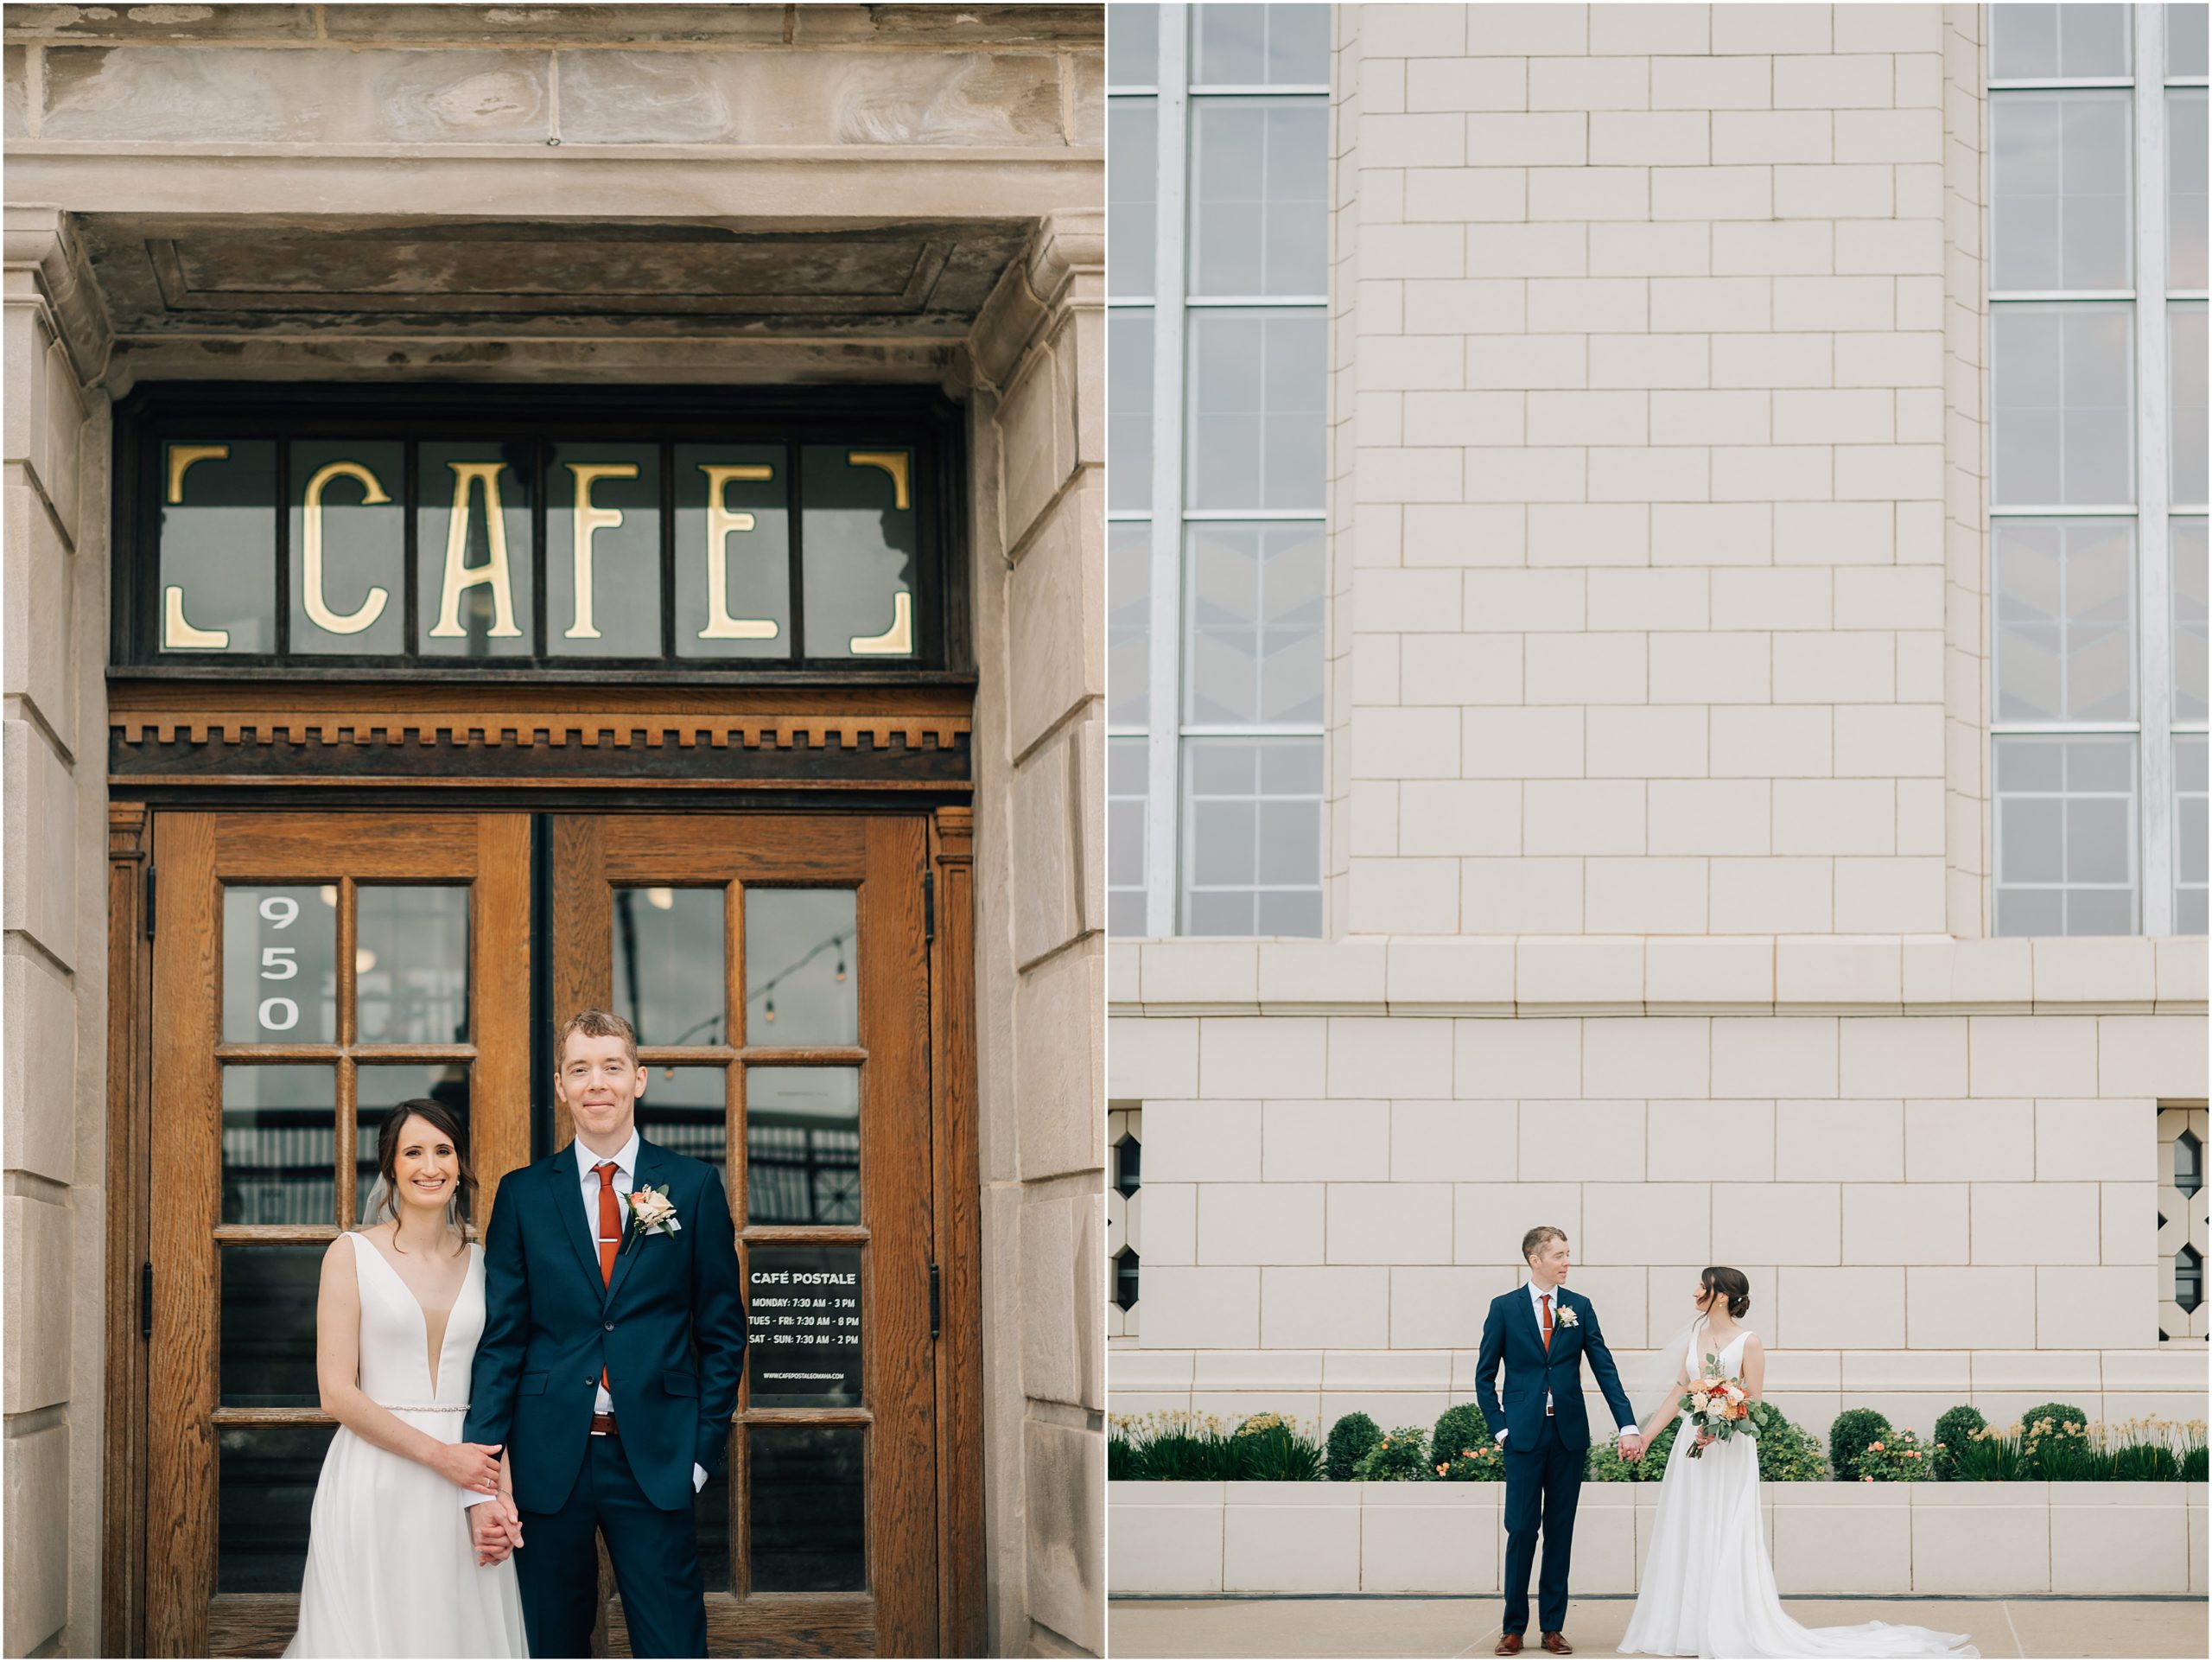 Omaha Nebraska Wedding Venue, Cafe Postale serves as a backdrop for the a bride and groom. Photo by Anna Brace, who specializes in Omaha Wedding Photography.
